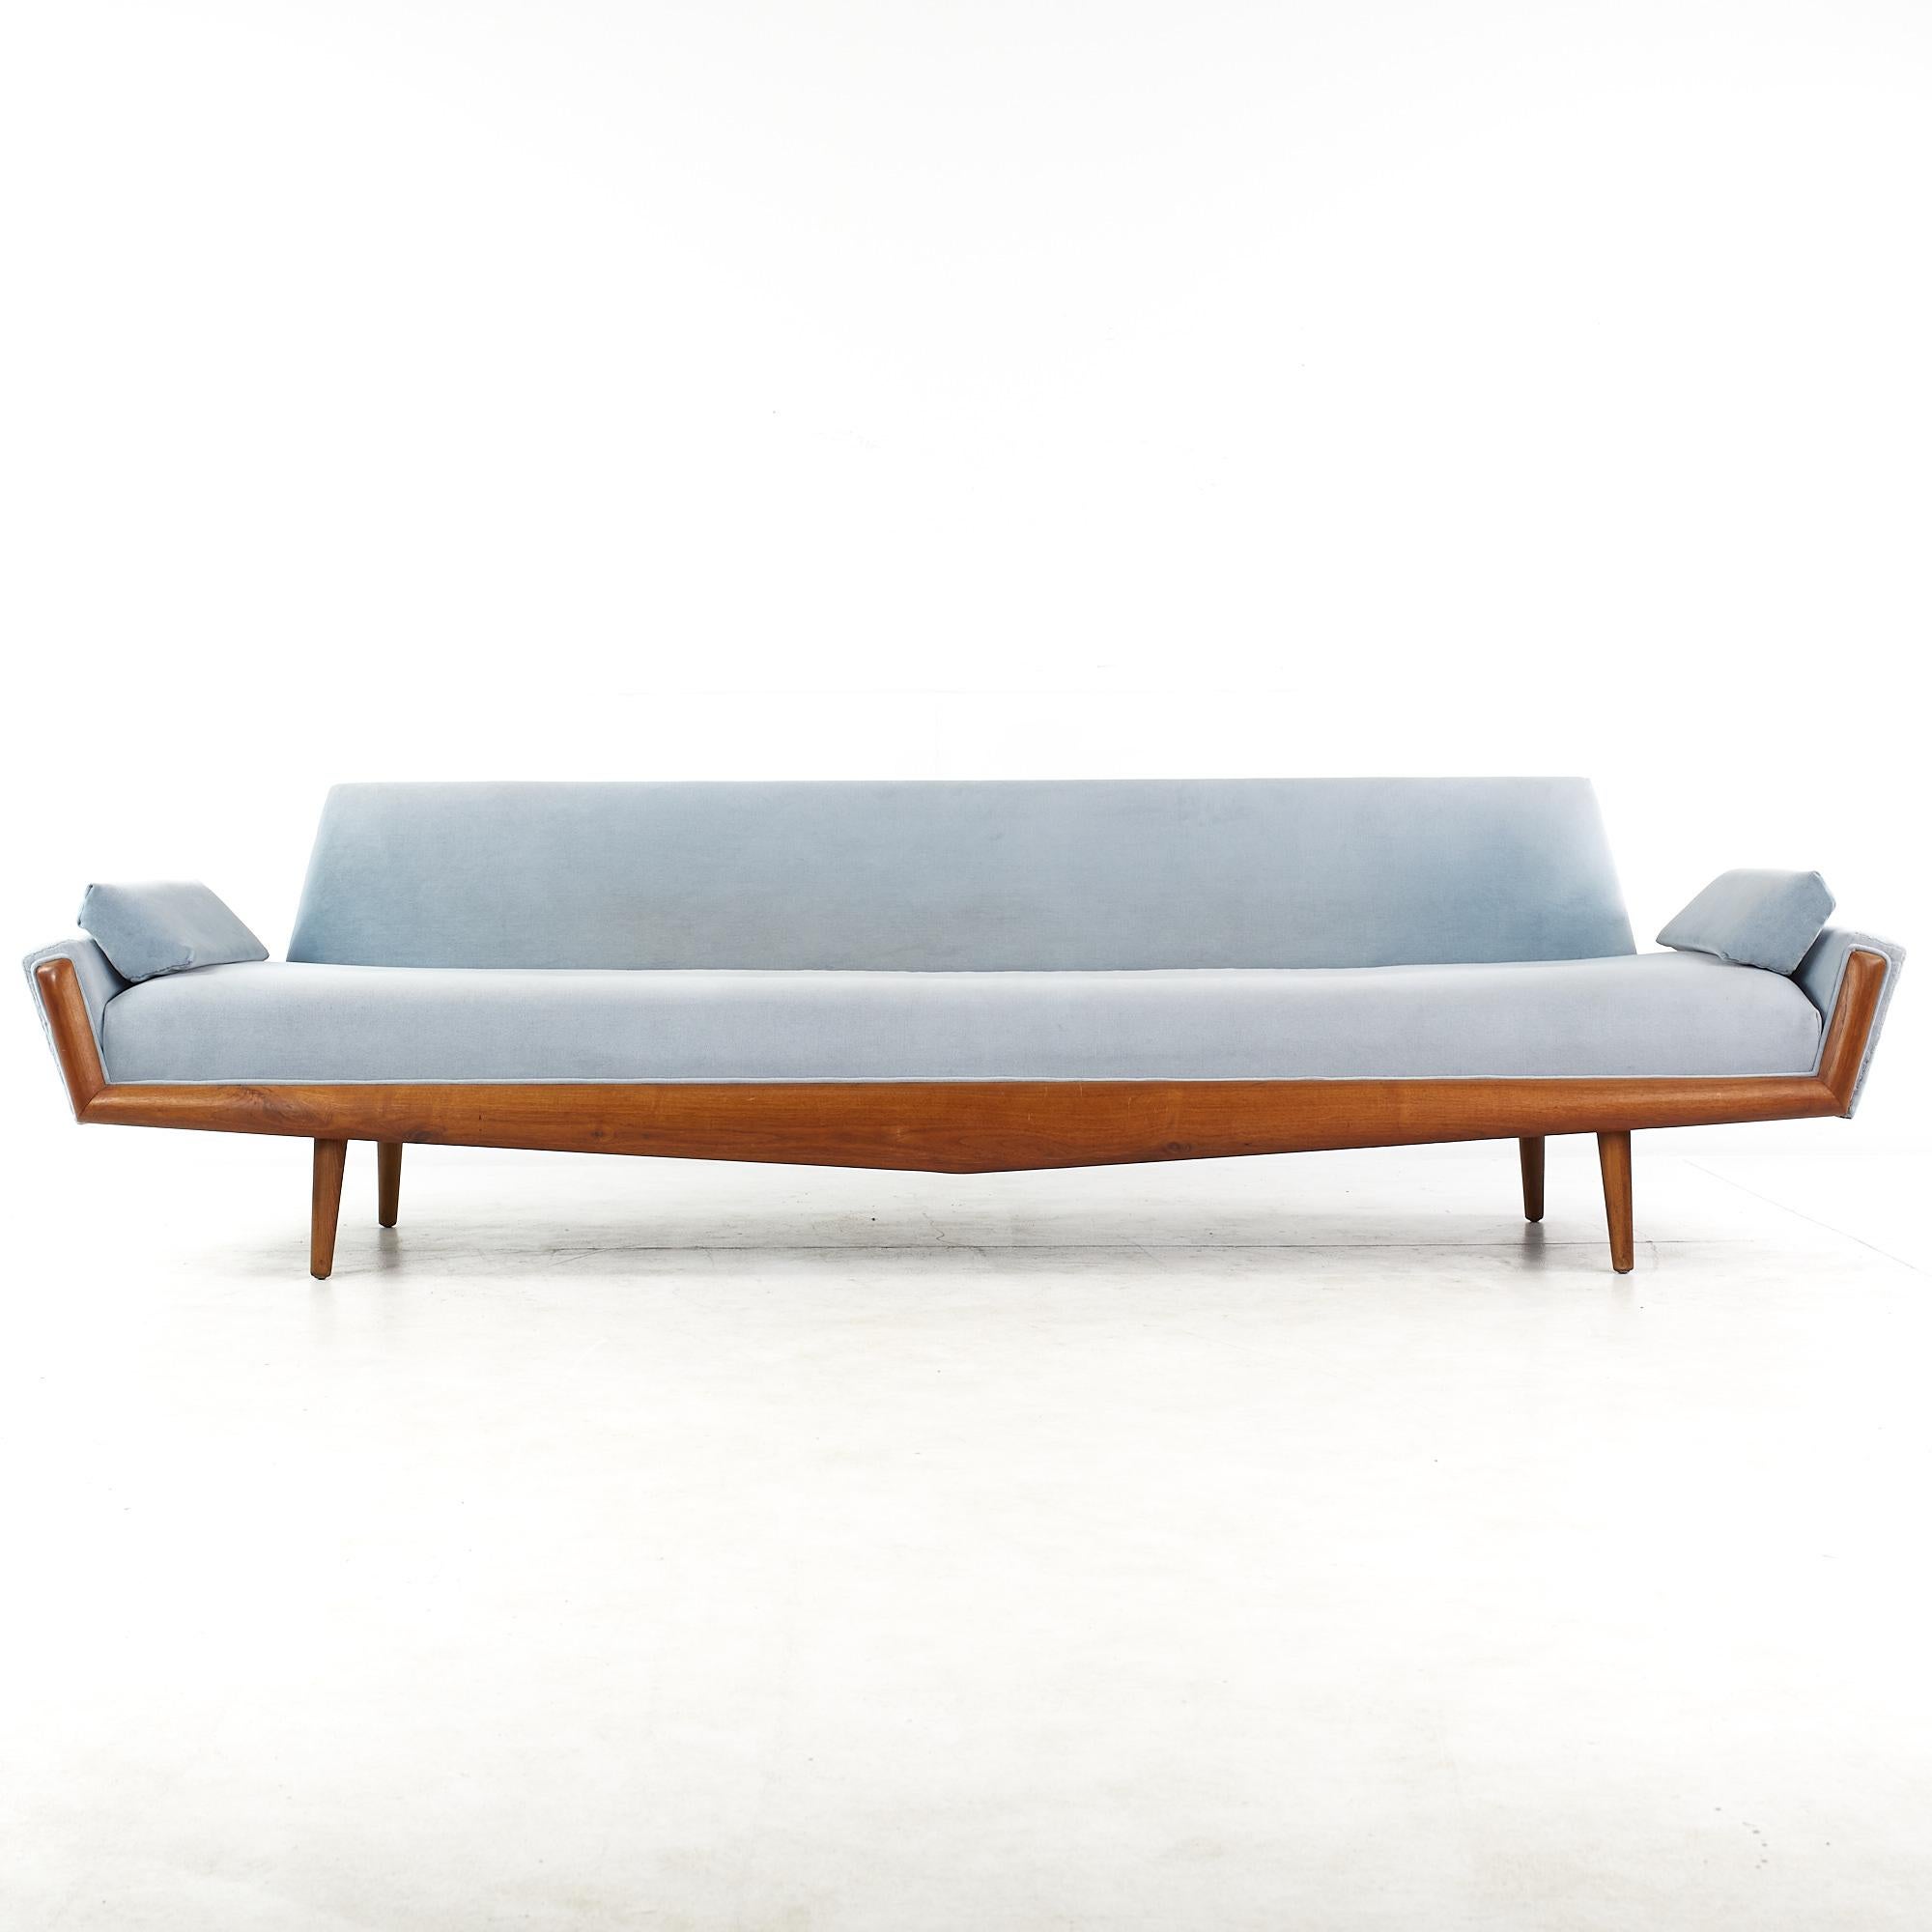 Adrian Pearsall for Craft Associates mid century blue velvet sofa

This sofa measures: 110 wide x 32 deep x 30 inches high, with a seat height of 18 and arm height of 23.5 inches

All pieces of furniture can be had in what we call restored